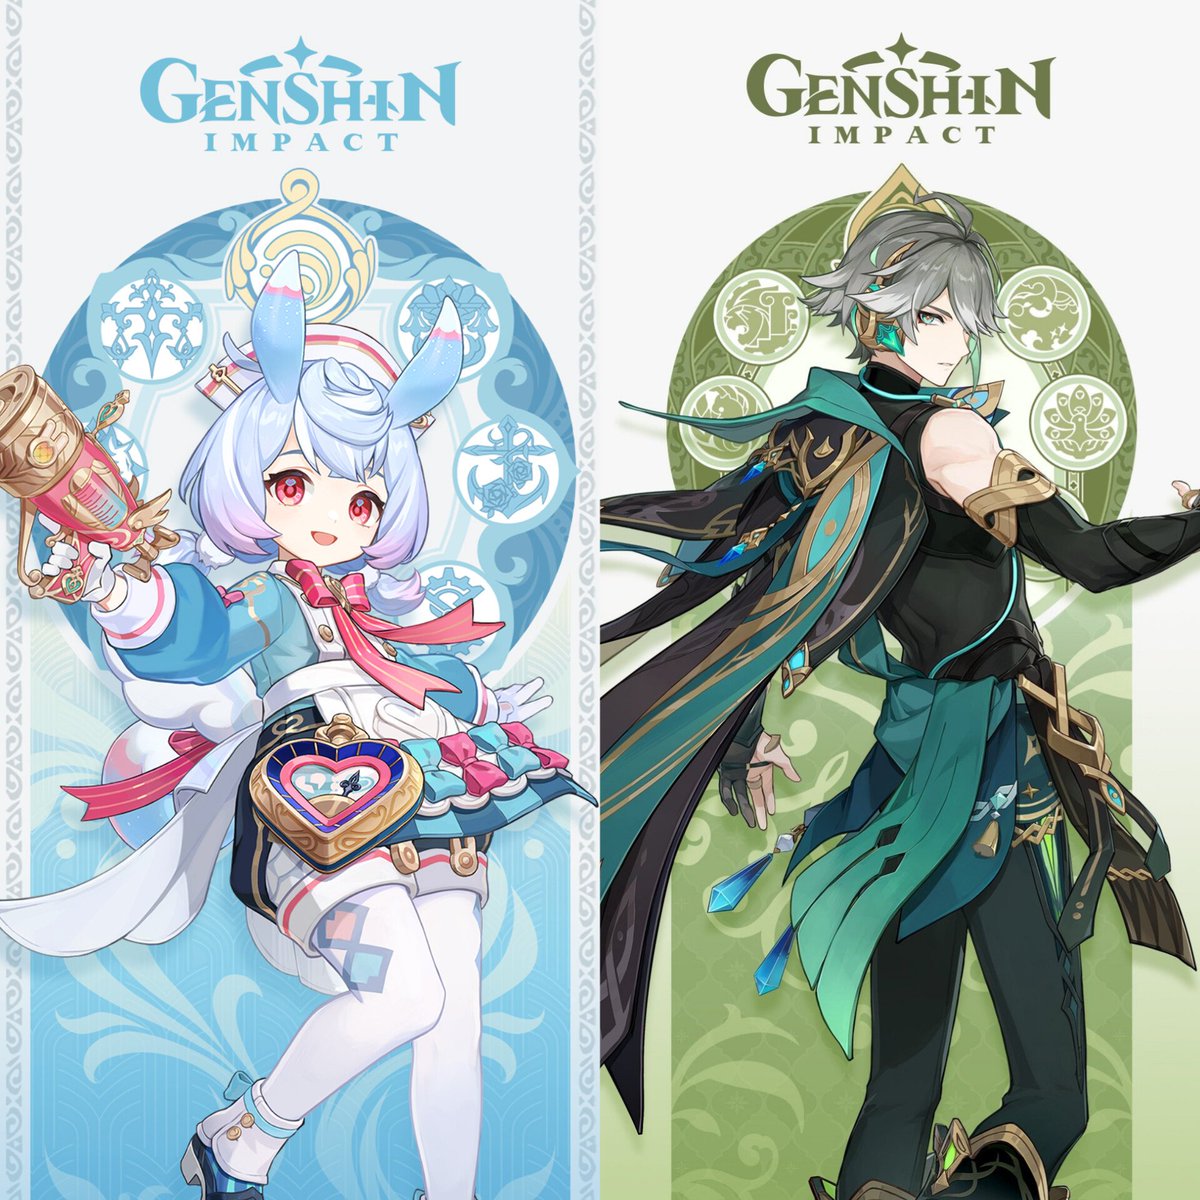 Genshin Impact 4.7 Banner Speculation

Phase 1 : Clorinde (Electro - Sword) & Wriothesley (Cryo - Catalyst)
Phase 2 : Sigewinne (Hydro - Bow) & Alhaitham (Dendro - Sword)

Sethos Will Be In Phase 2

#GenshinImpact #Genshin #Clorinde #Wriothesley #Sigewinne #Alhaitham